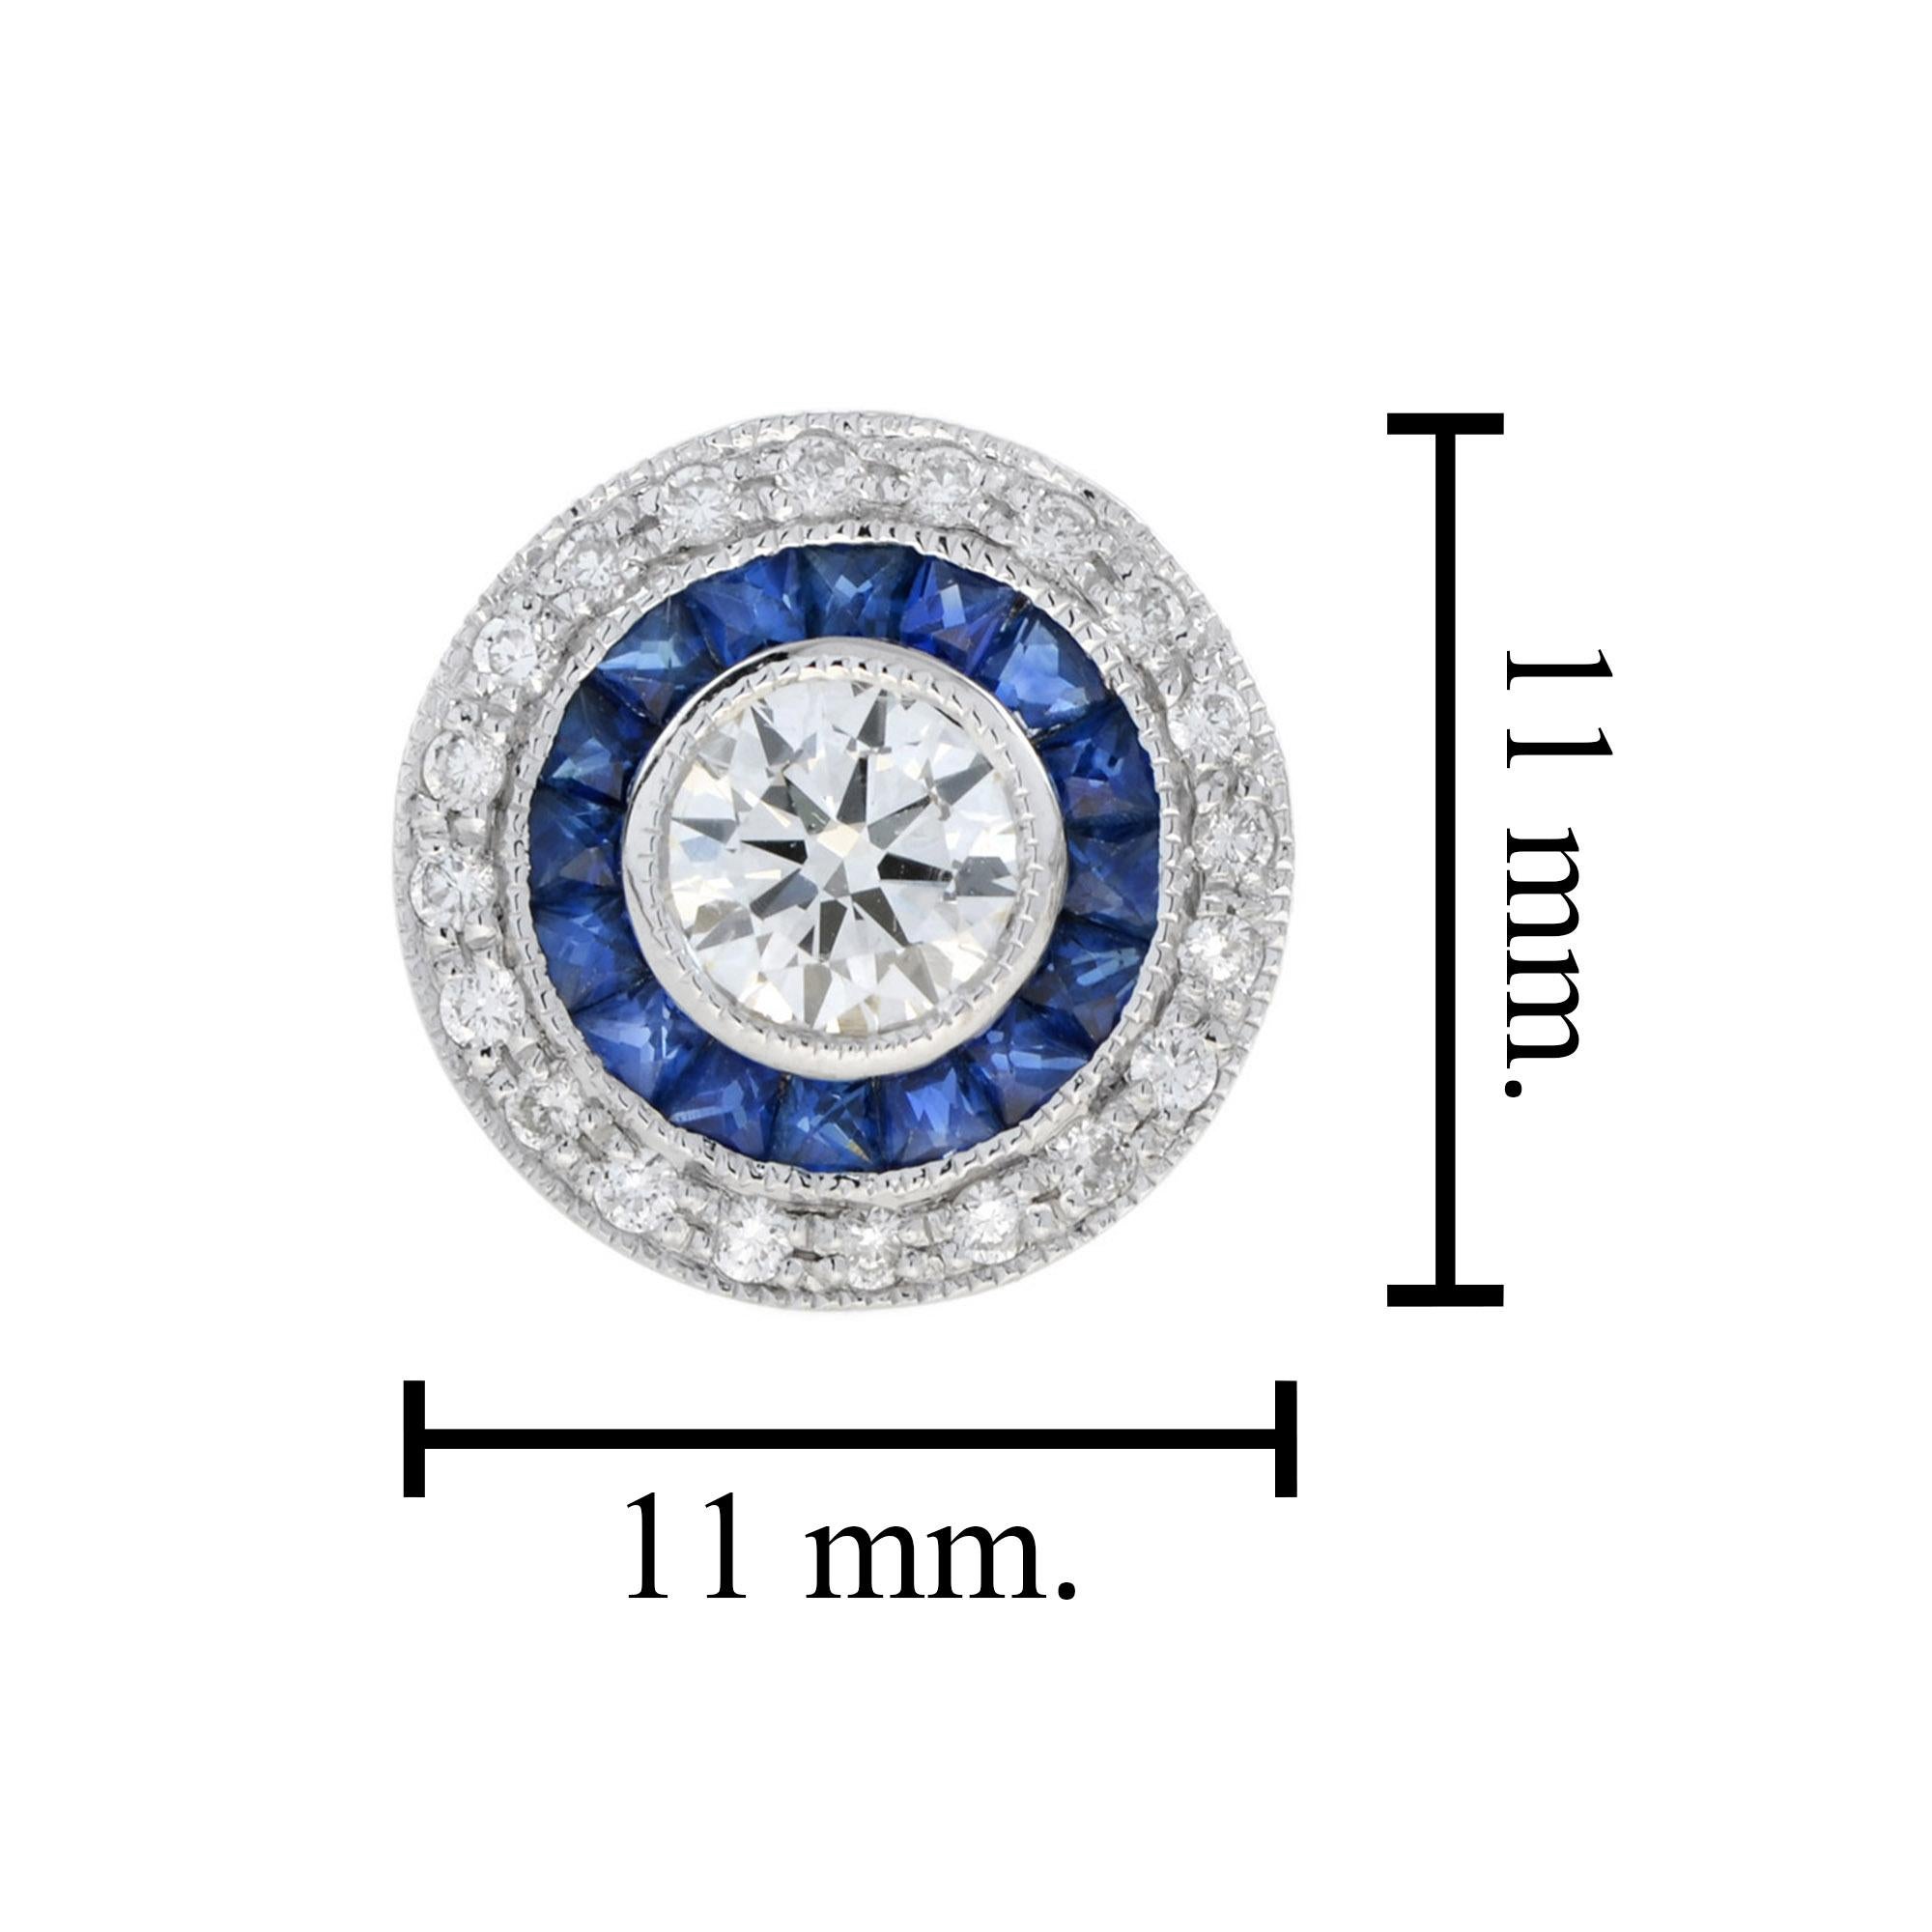 Round Cut Art Deco French Cut Sapphire and Diamond Stud Earrings in 18K White Gold